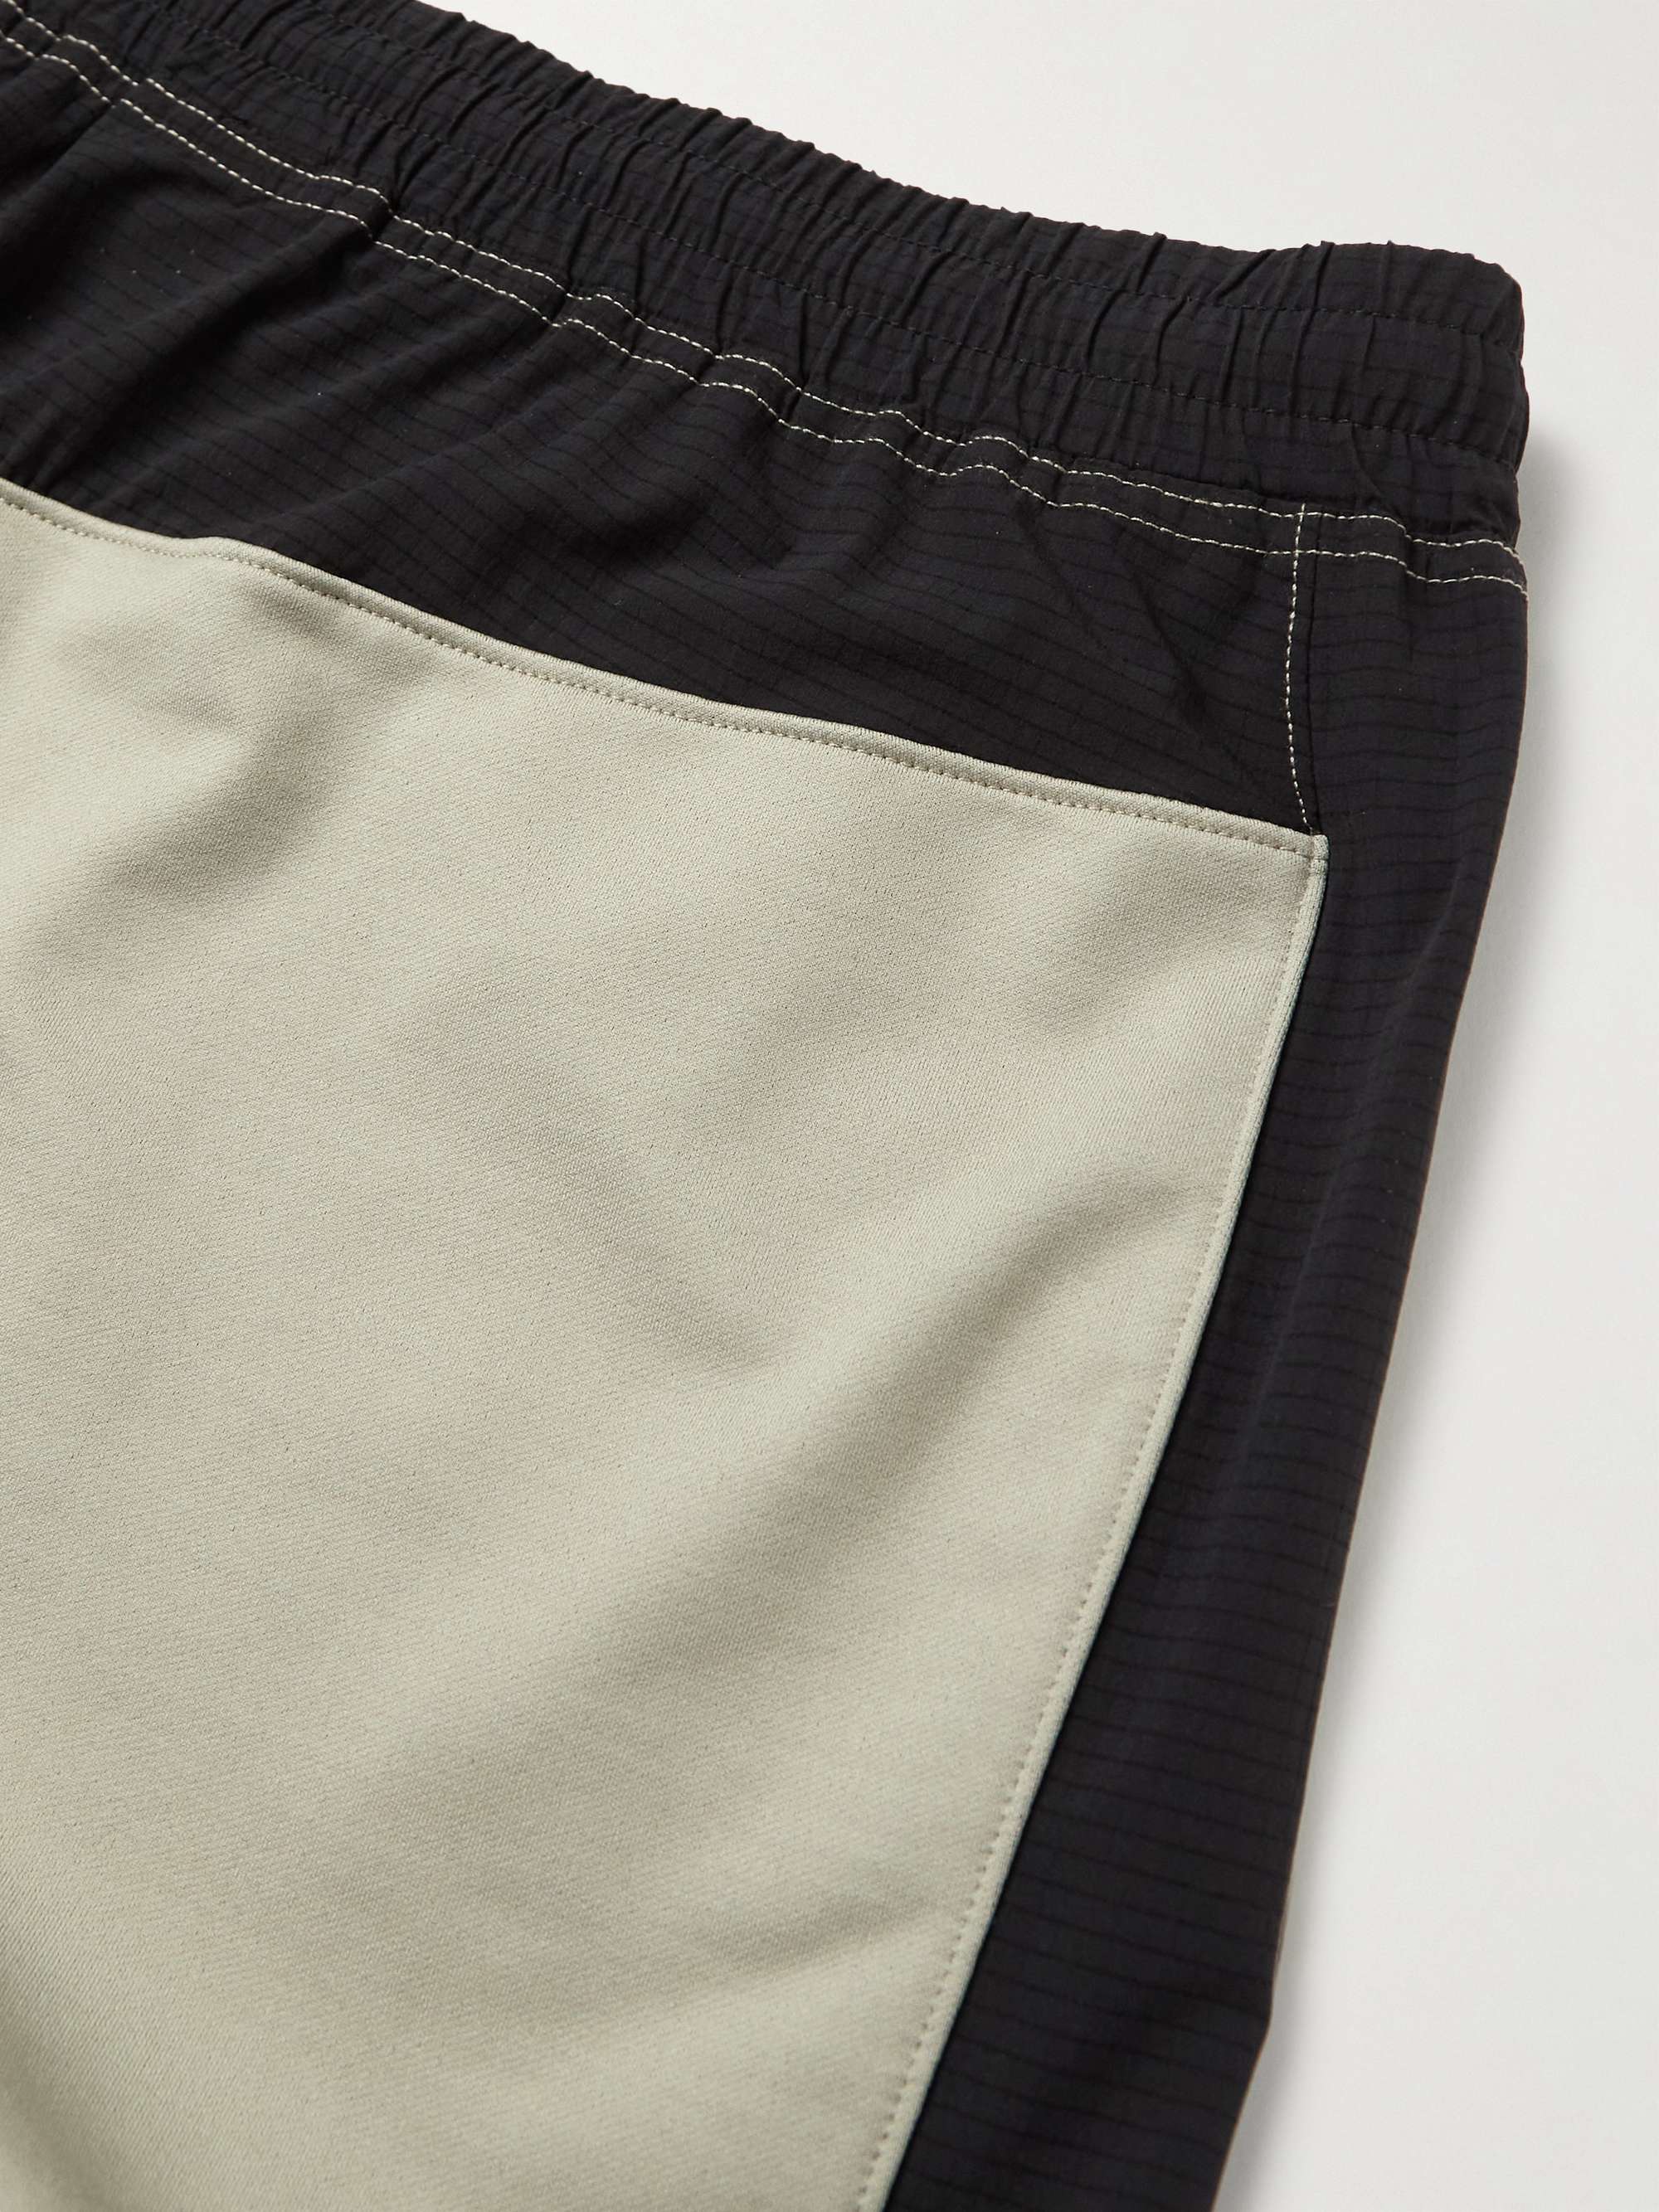 REIGNING CHAMP Ripstop-Trimmed Polartec Power Stretch Pro Sweatpants